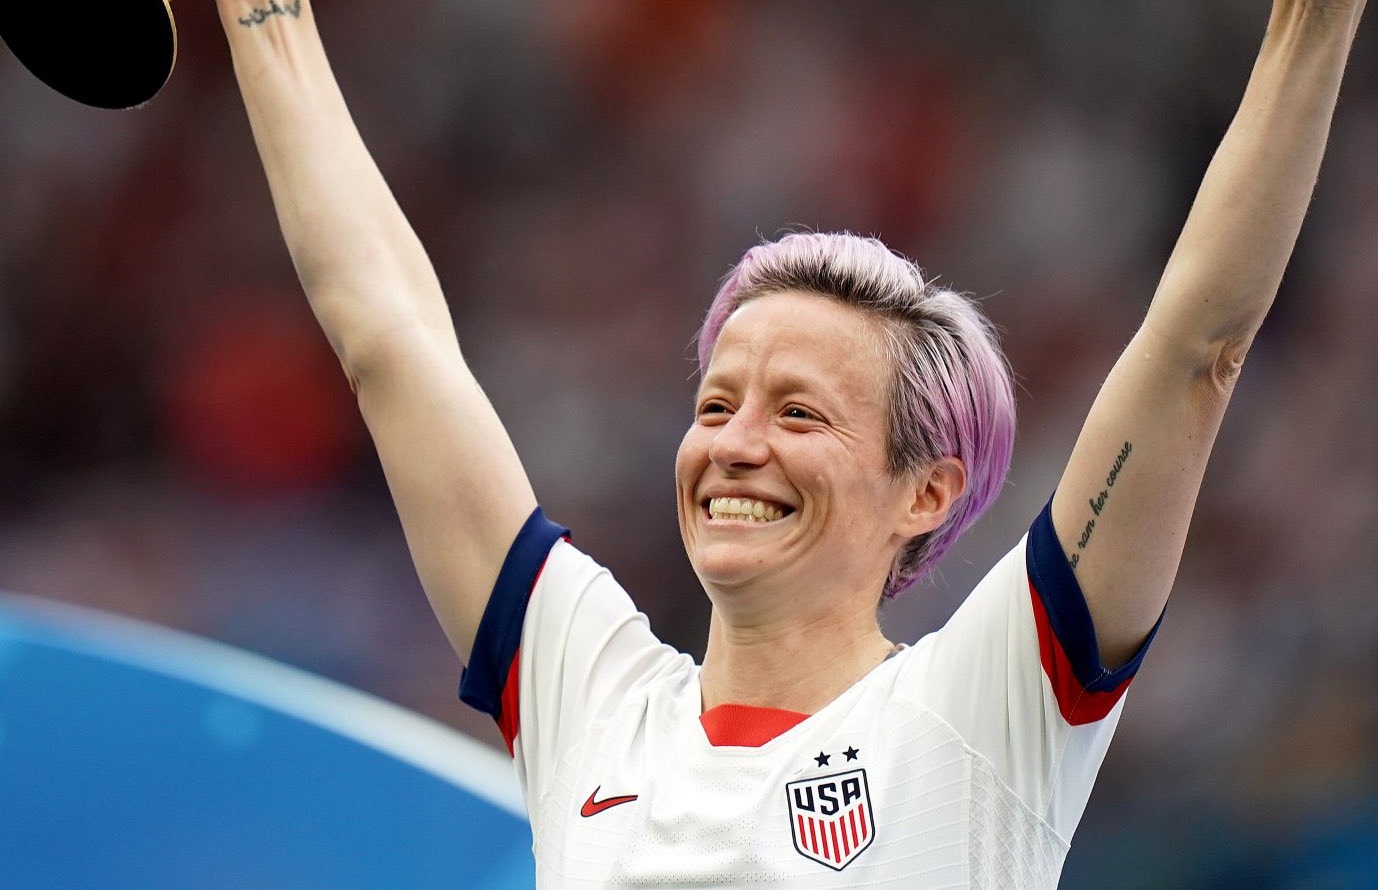 When did Megan Rapinoe make her debut for the USWNT?